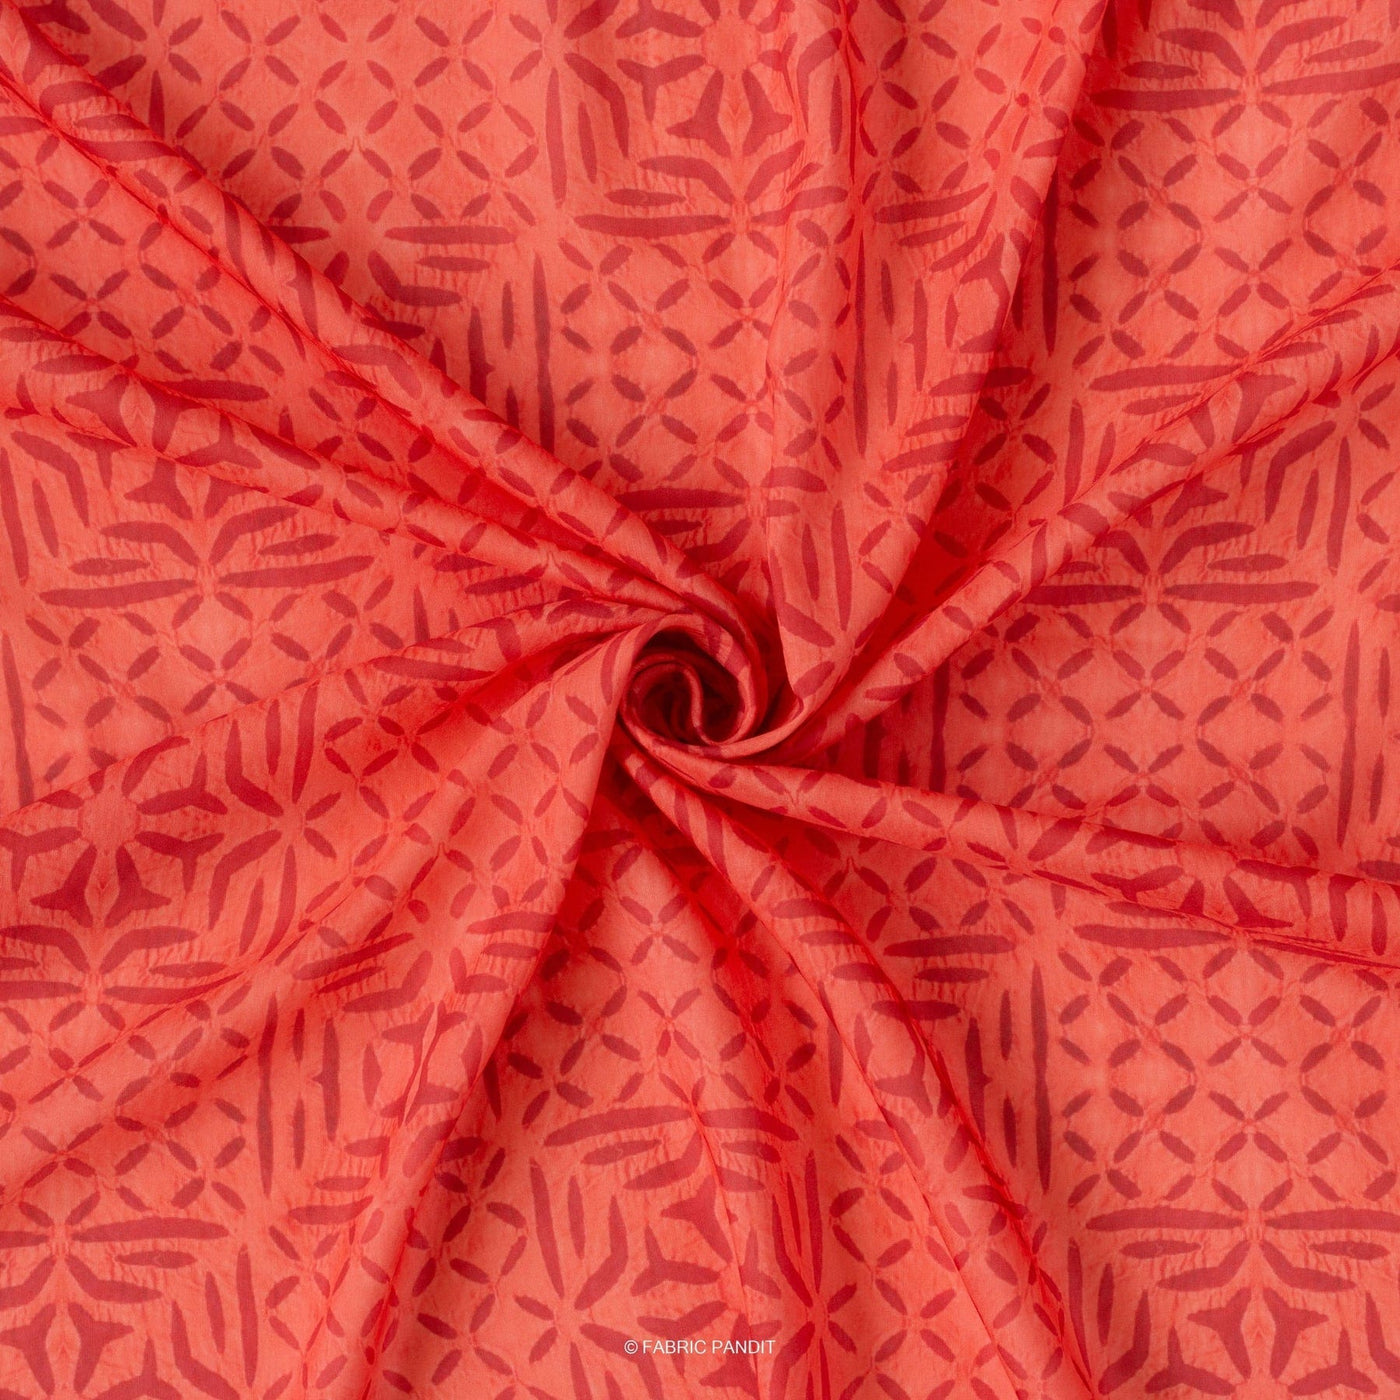 Fabric Pandit Fabric Salmon Red Abstract Diamond Applique Pattern Digital Printed Muslin Fabric (Width 44 Inches)